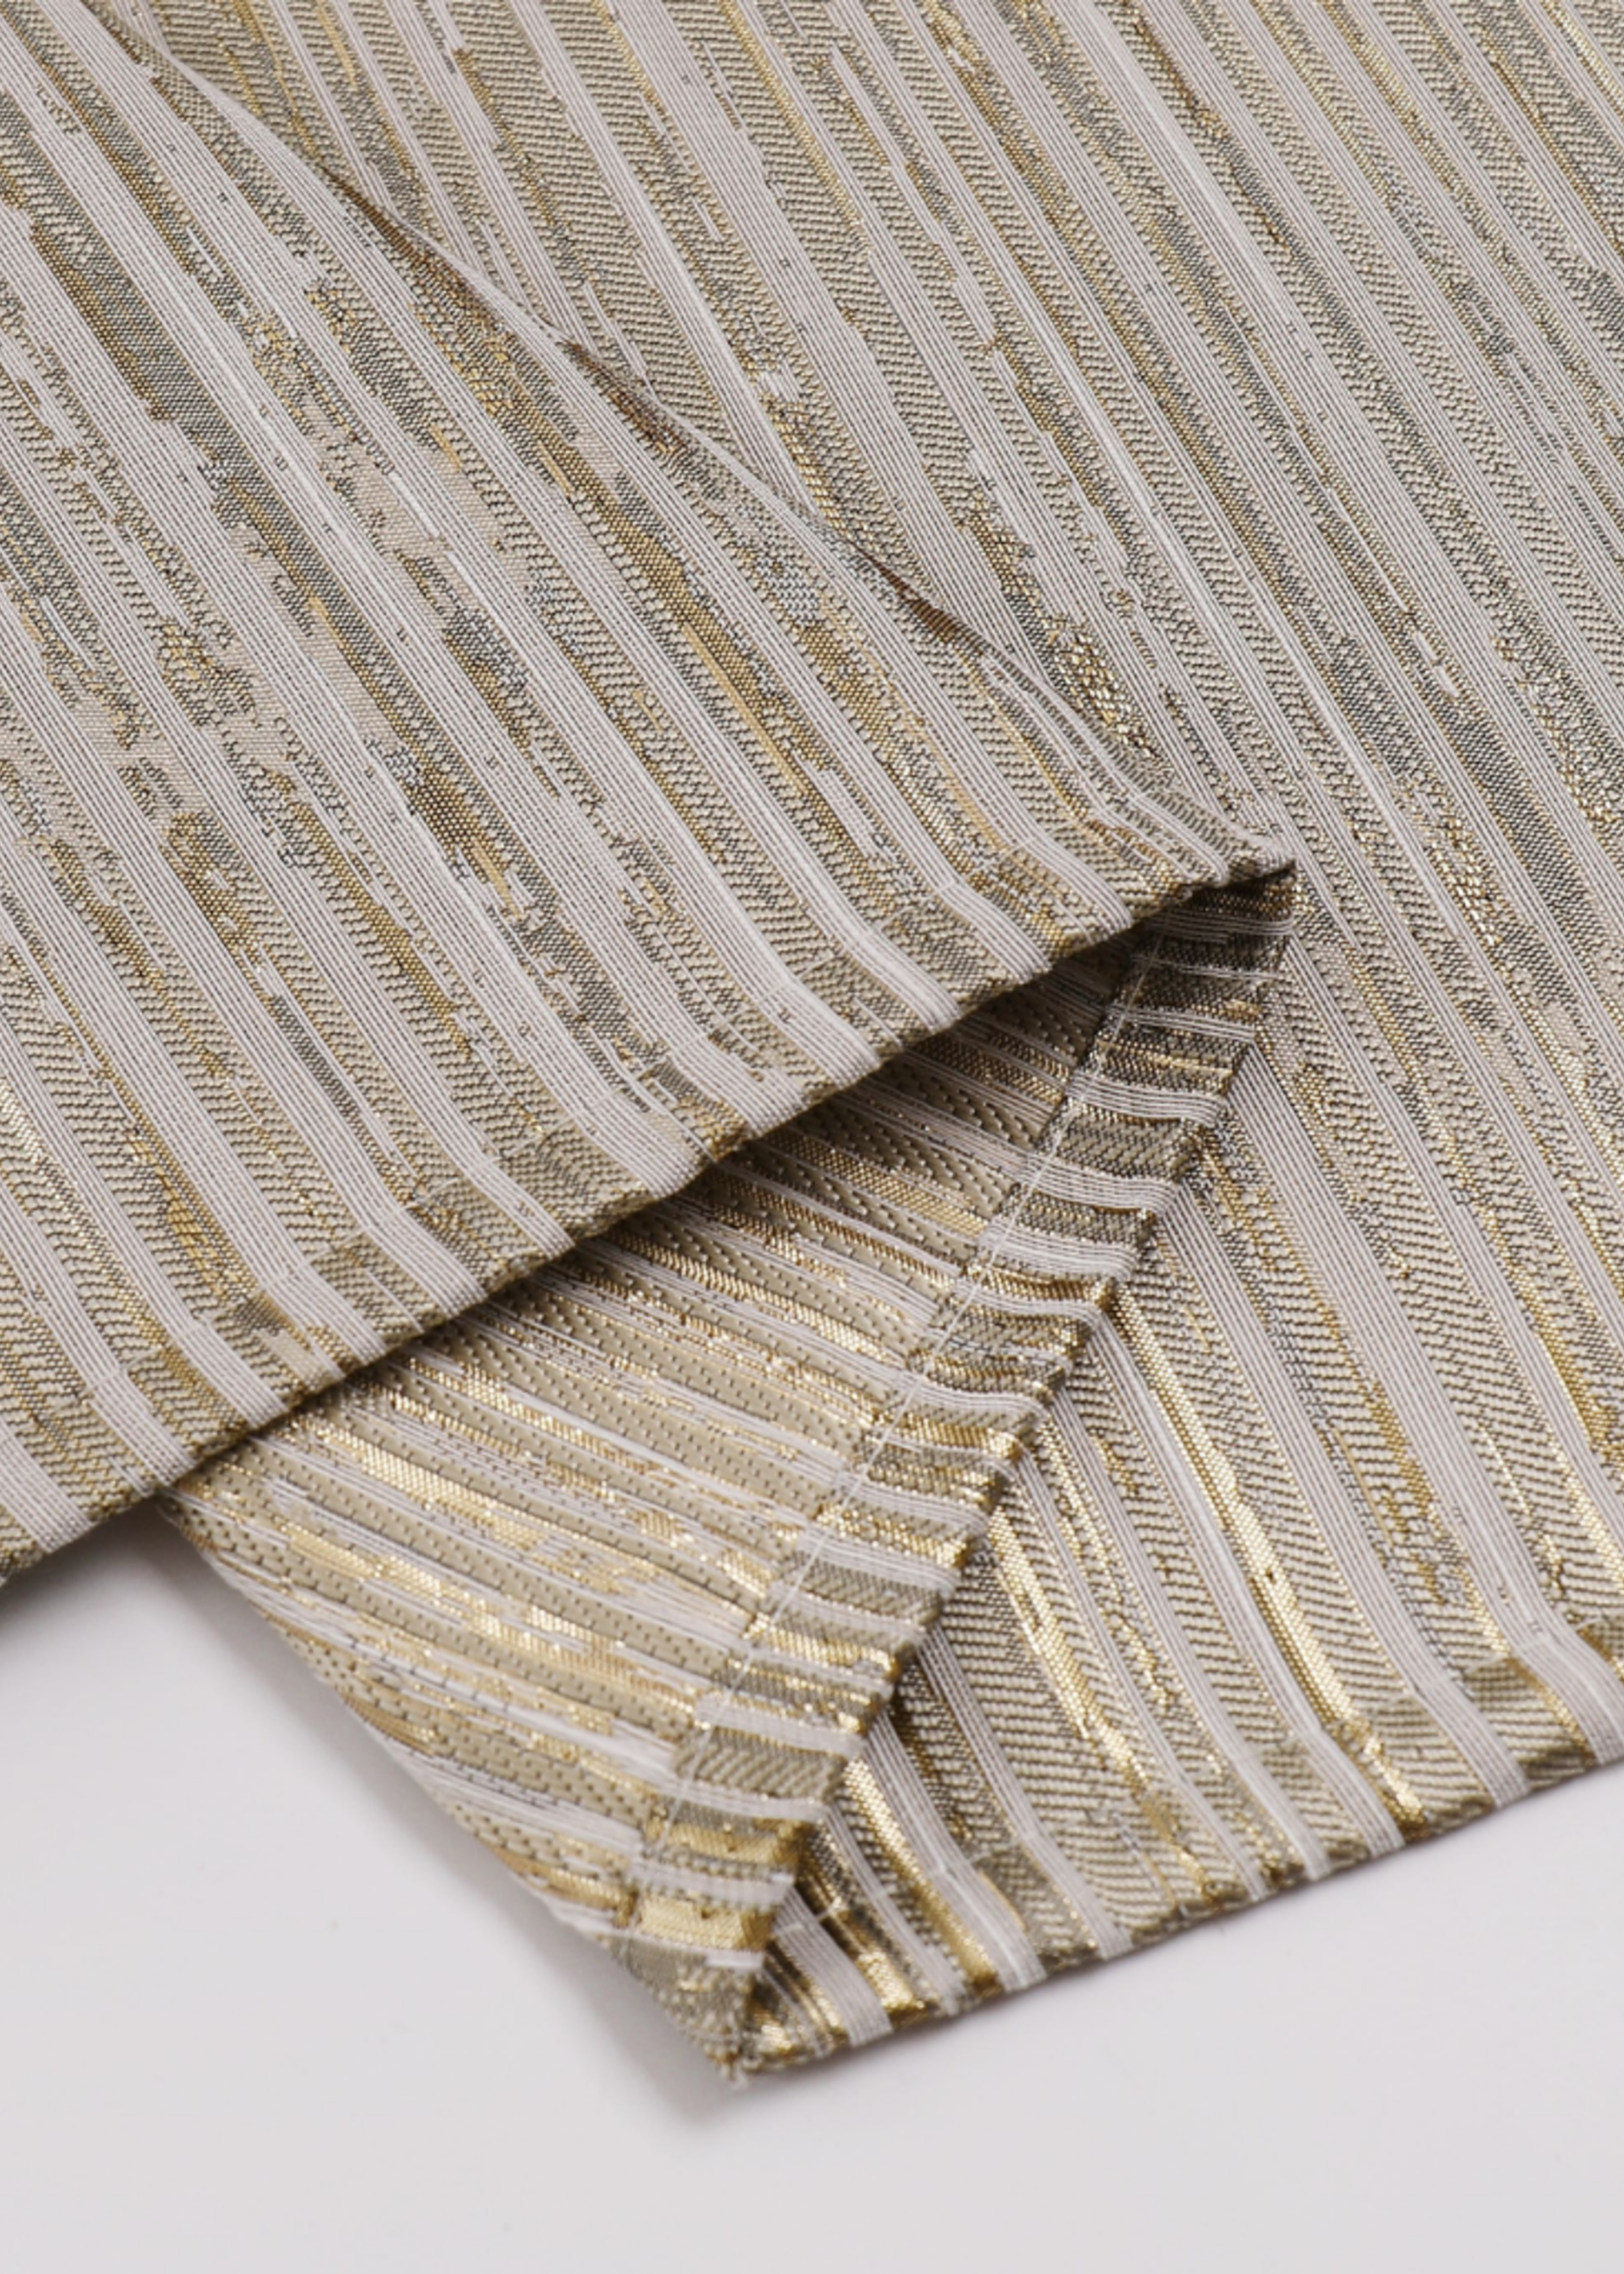 Jacquard Tablecloth Striped Gold/Beige #1205